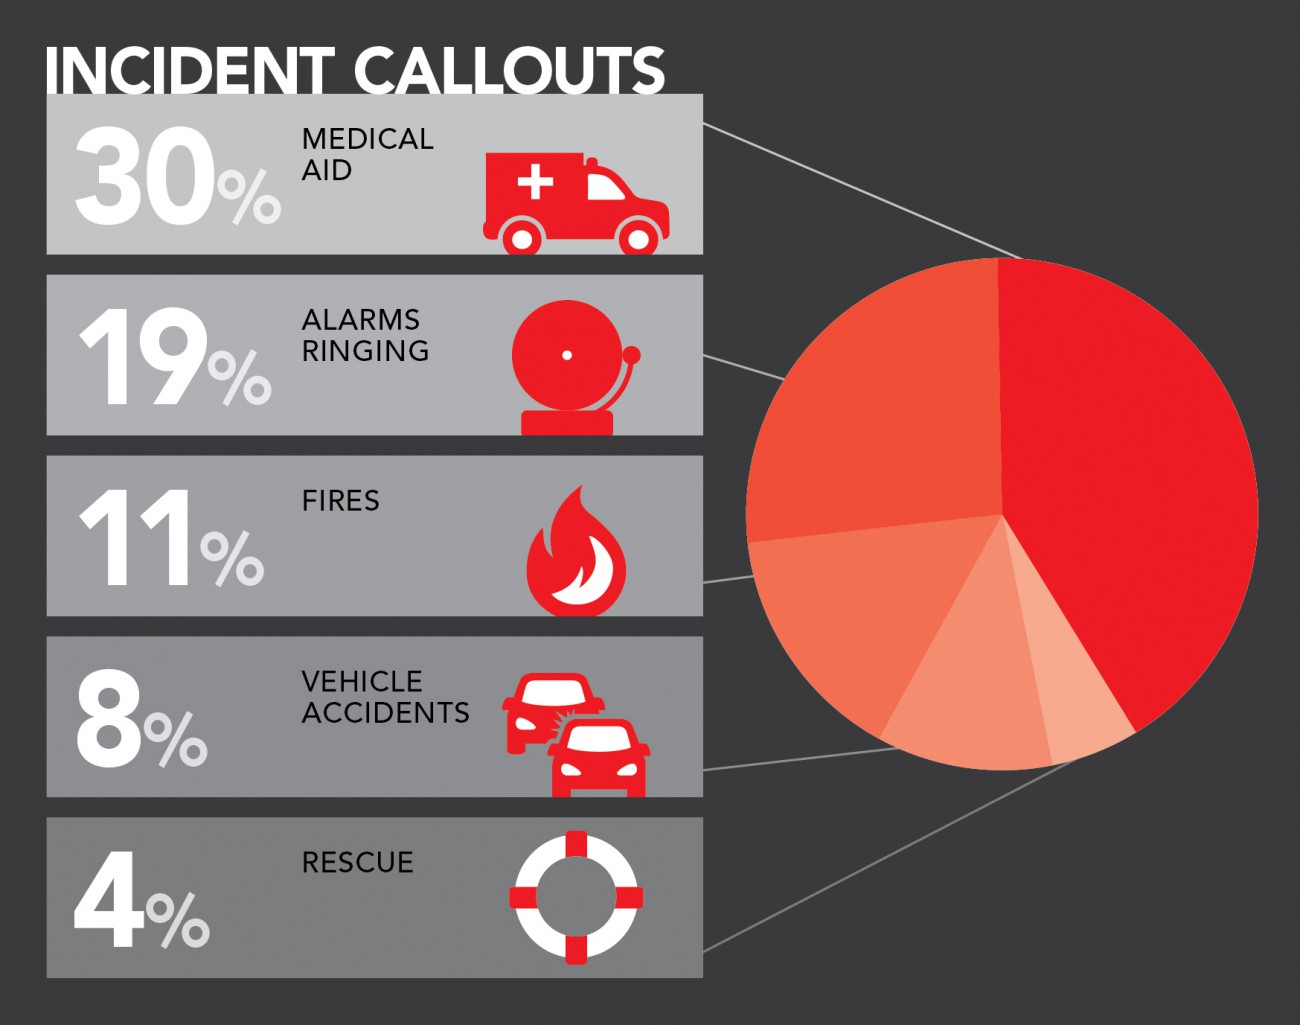 Graphic: 30% medical aid, 19% alarms ringing, 11% fires, 8% vehicle accidents, 4% rescue.